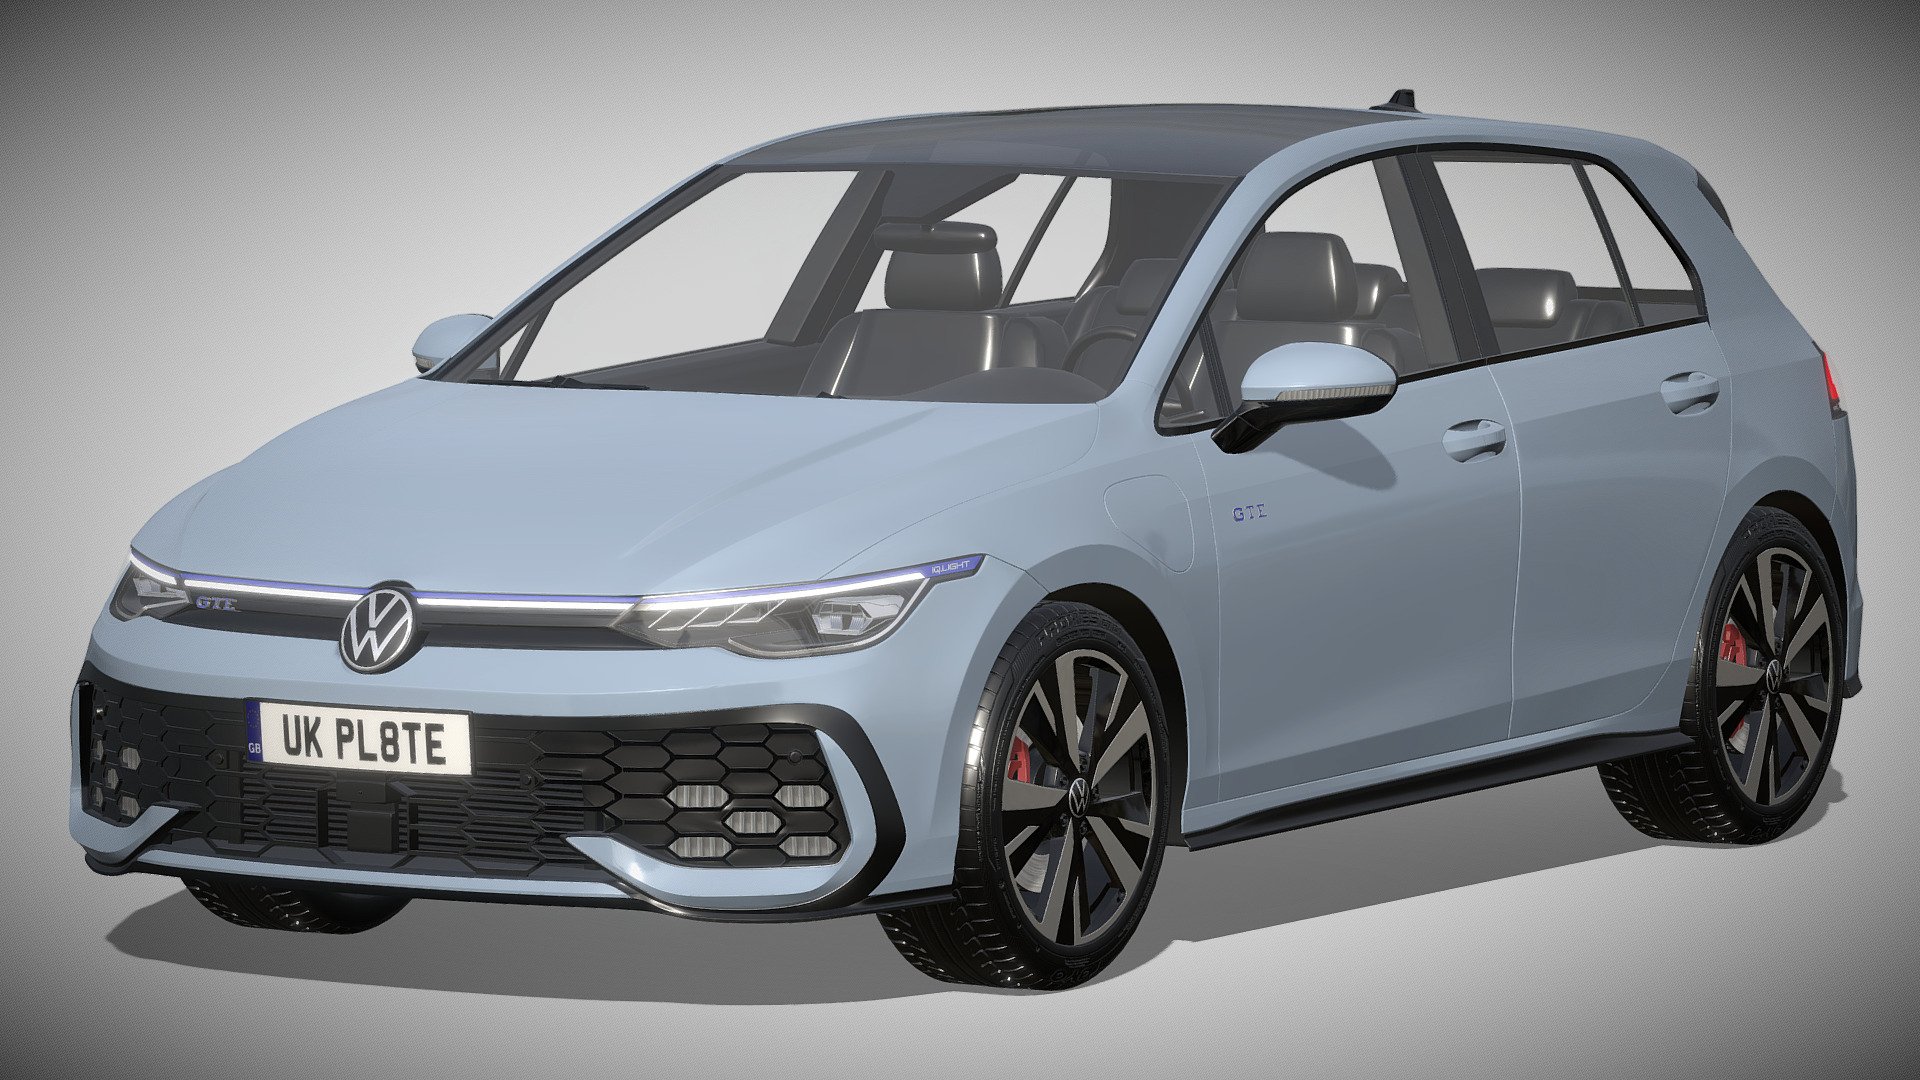 Volkswagen Golf GTE 2024

https://www.volkswagen.de/de/modelle/der-neue-golf-gte.html

Clean geometry Light weight model, yet completely detailed for HI-Res renders. Use for movies, Advertisements or games

Corona render and materials

All textures include in *.rar files

Lighting setup is not included in the file! - Volkswagen Golf GTE 2024 - Buy Royalty Free 3D model by zifir3d 3d model